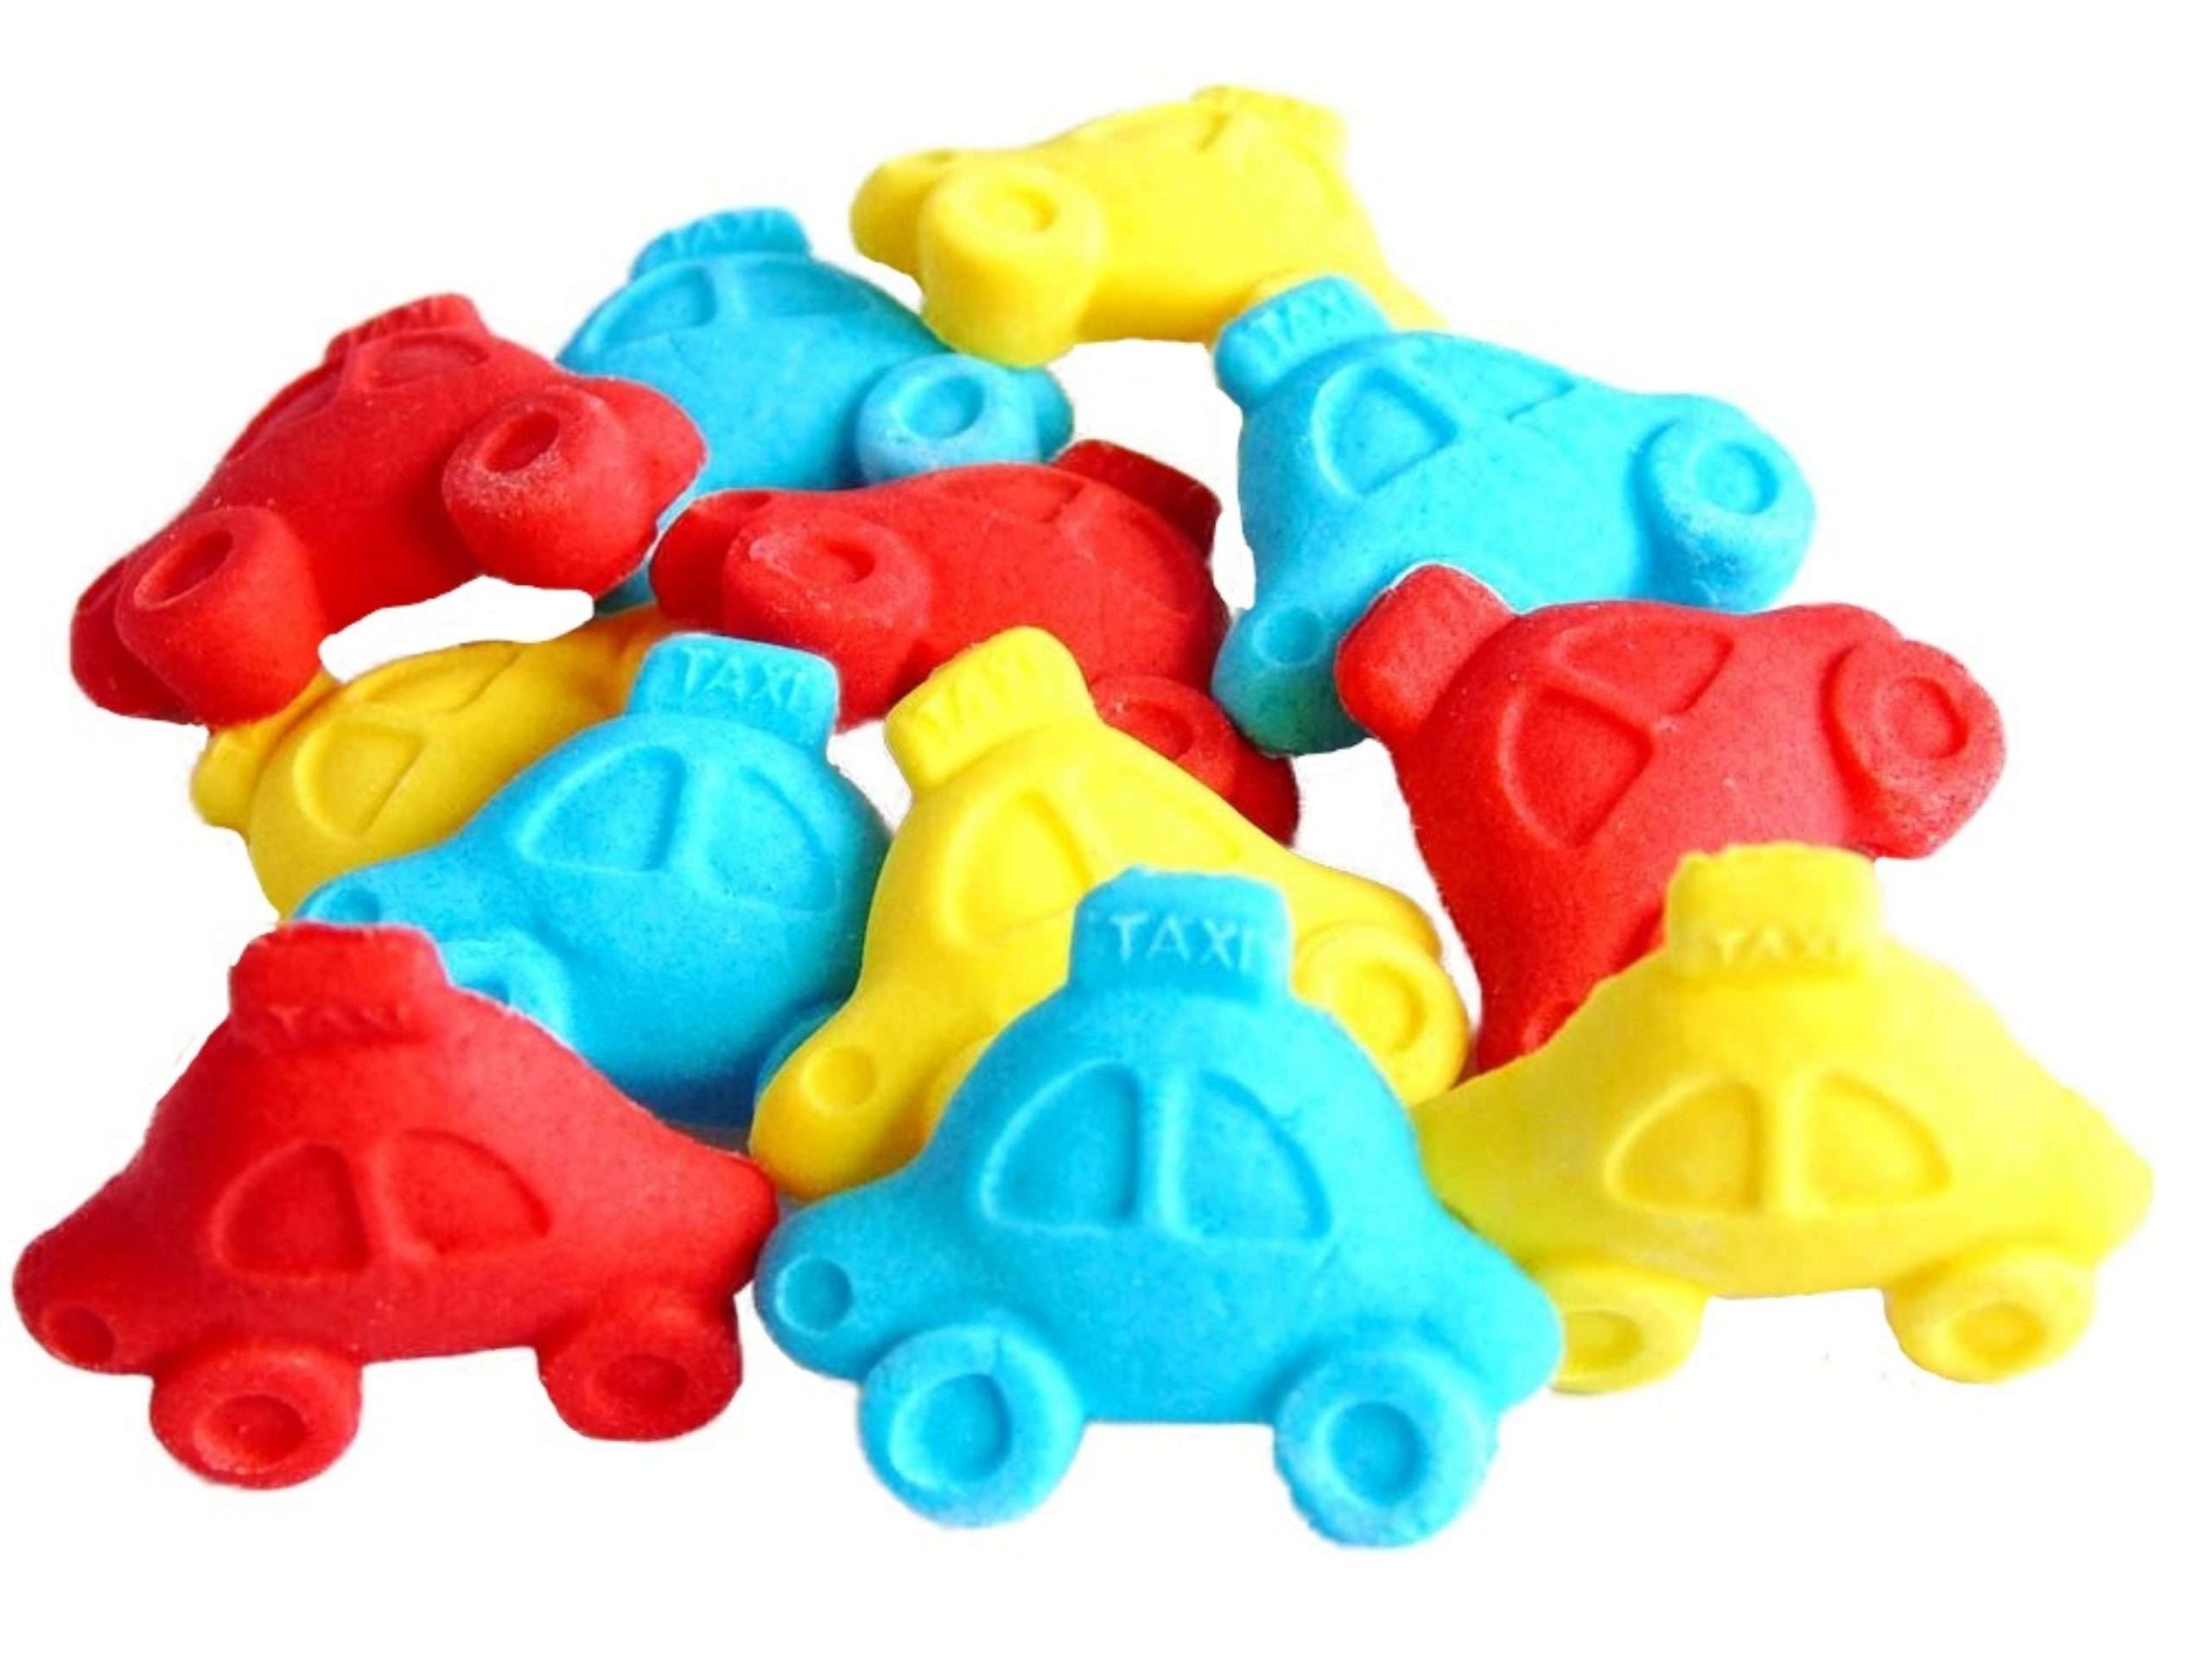 Inked1220carsjpeg1 LI scaled We have something for the keen car enthusiast in the family these novelty cars. Available in a mix of red, blue and yellow with the option of other colours available on request Novelty edible cars ideal cake decorations and cupcake toppers Approx Size: 3.5cm to 3.5cm